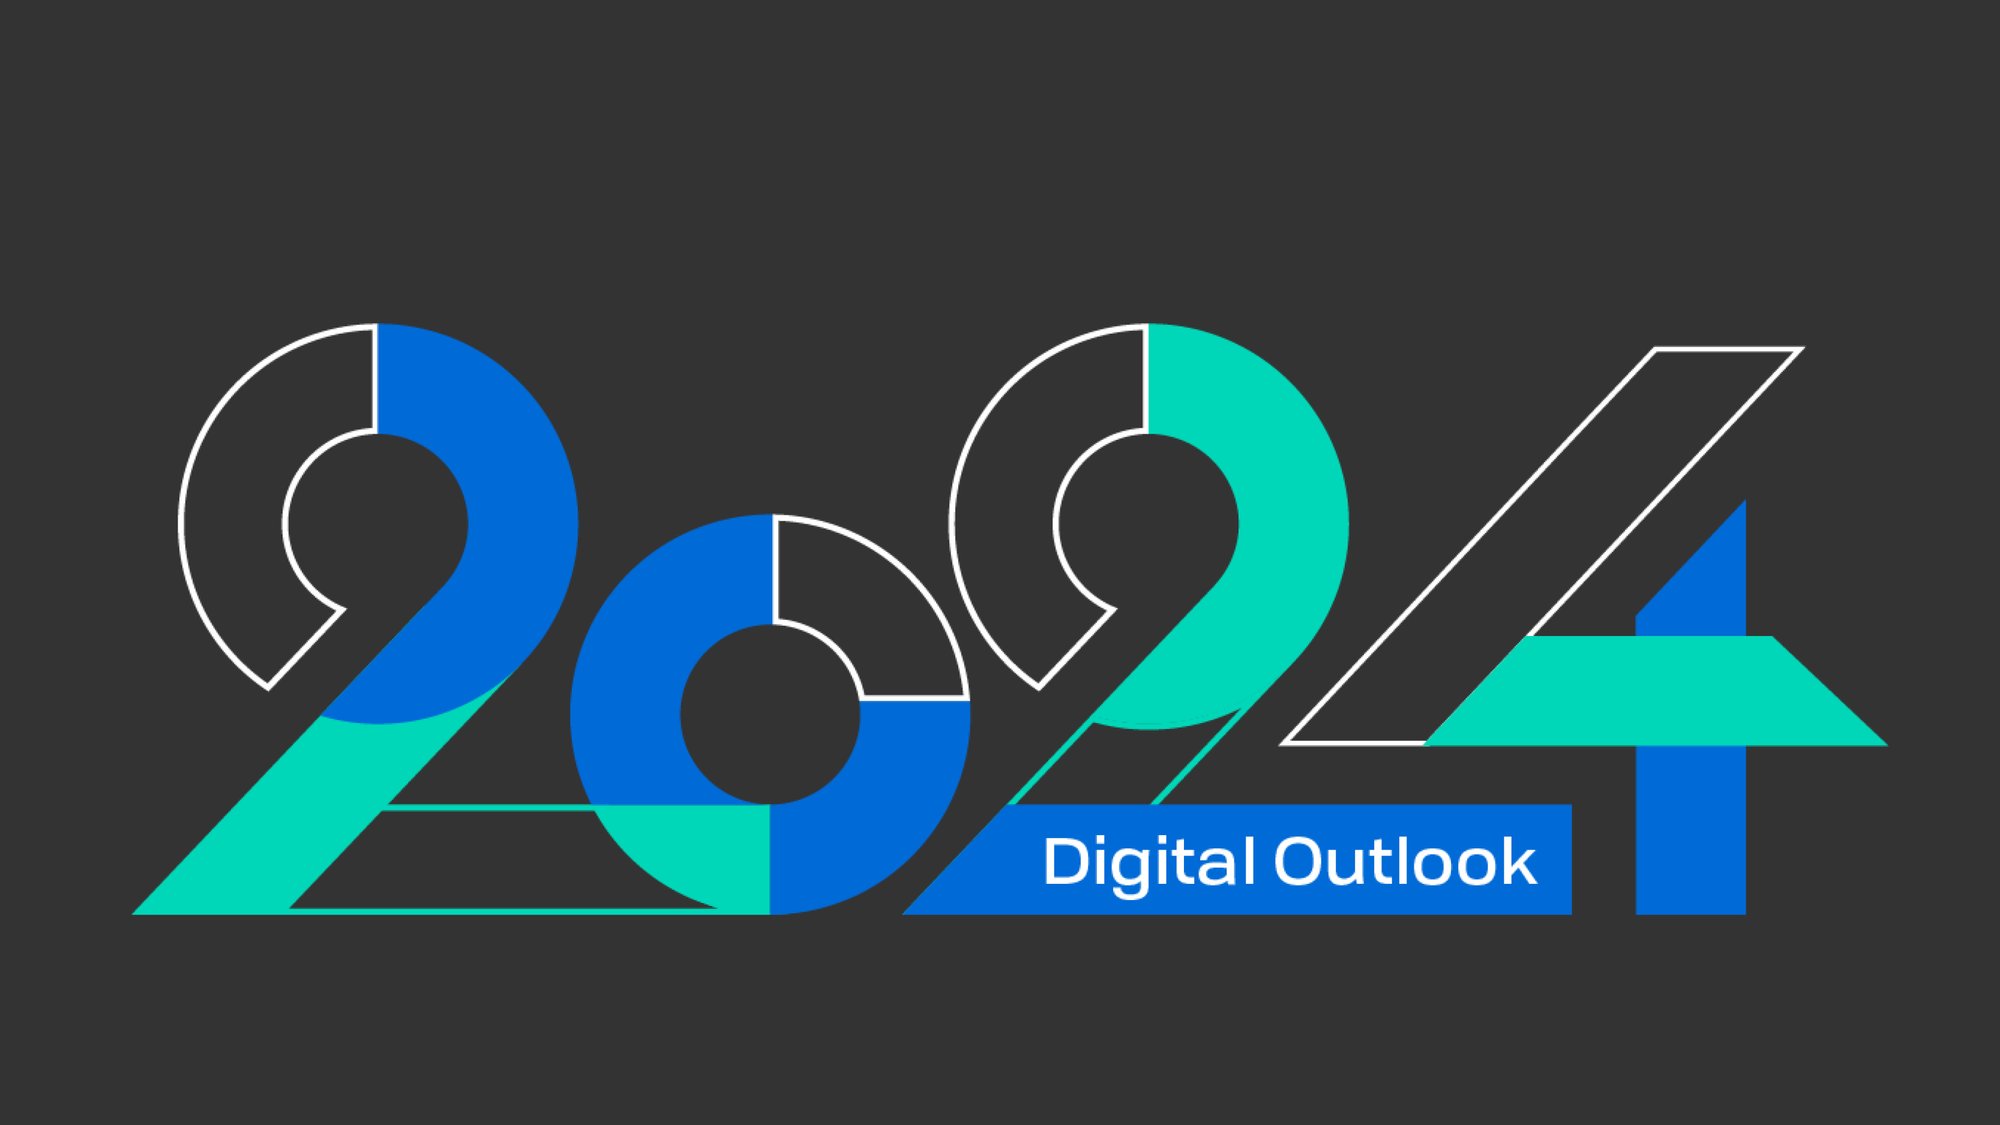 An image containing the words "2024 Digital Outlook" in blue and teal over a black background.